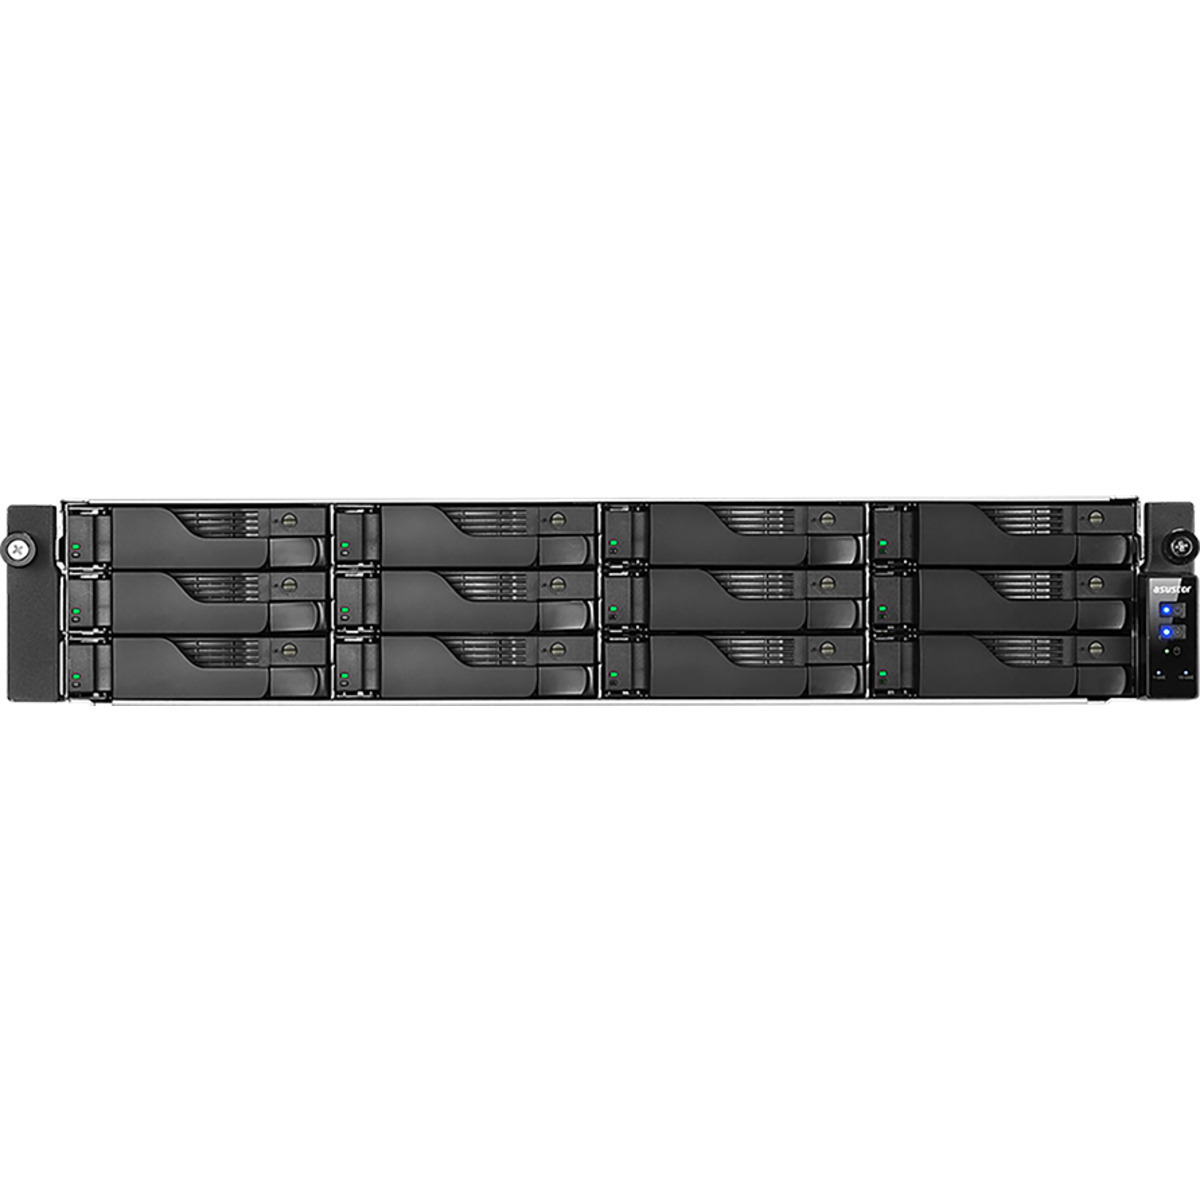 buy ASUSTOR LOCKERSTOR 12RD AS6512RD RackMount NAS - Network Attached Storage Device Burn-In Tested Configurations - FREE RAM UPGRADE - nas headquarters buy network attached storage server device das new raid-5 free shipping usa LOCKERSTOR 12RD AS6512RD